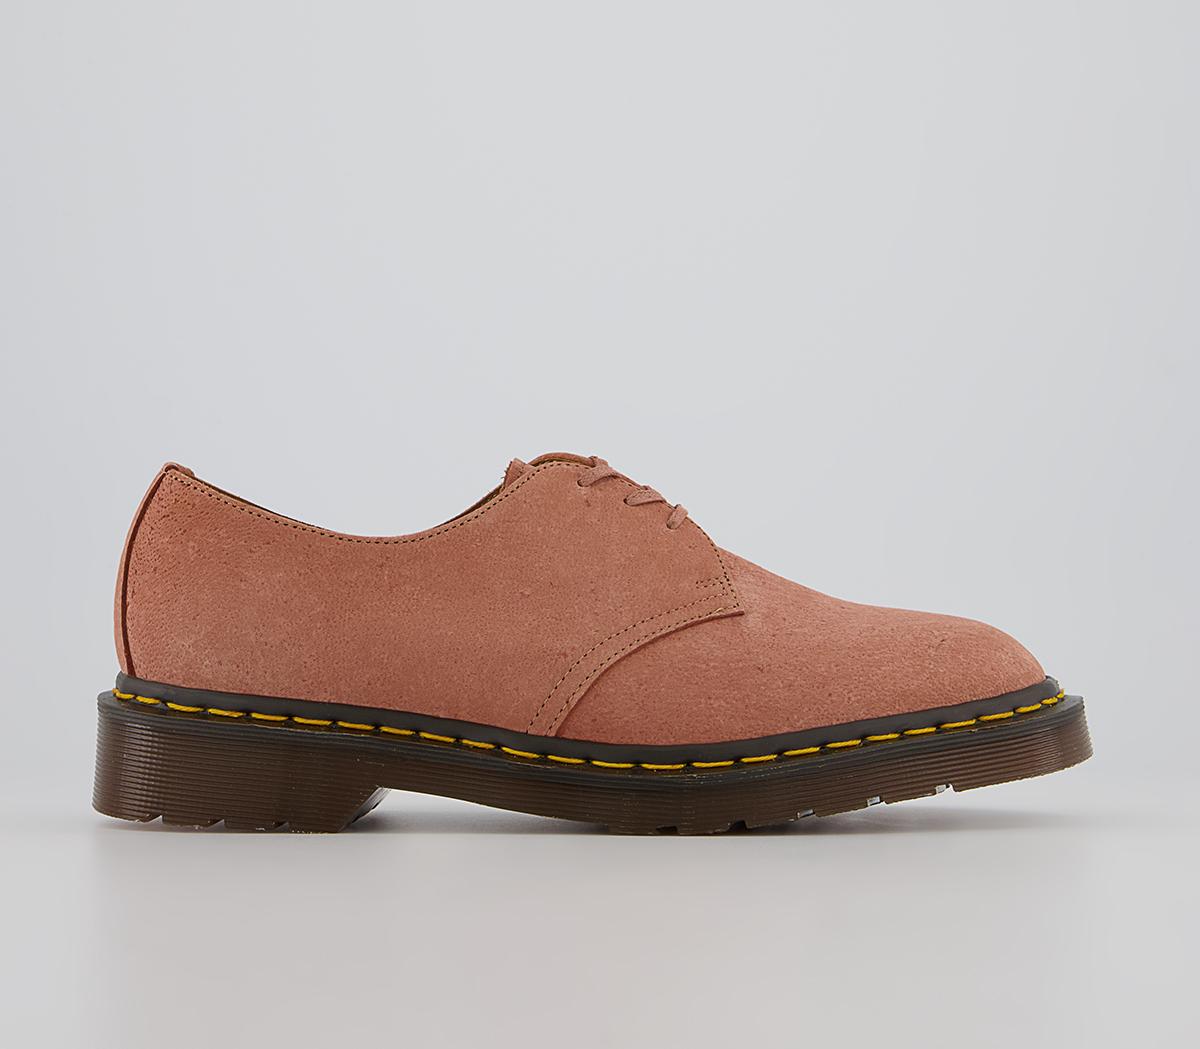 Dr. Martens1461 3 Eye Made in England ShoesPink Nubuck